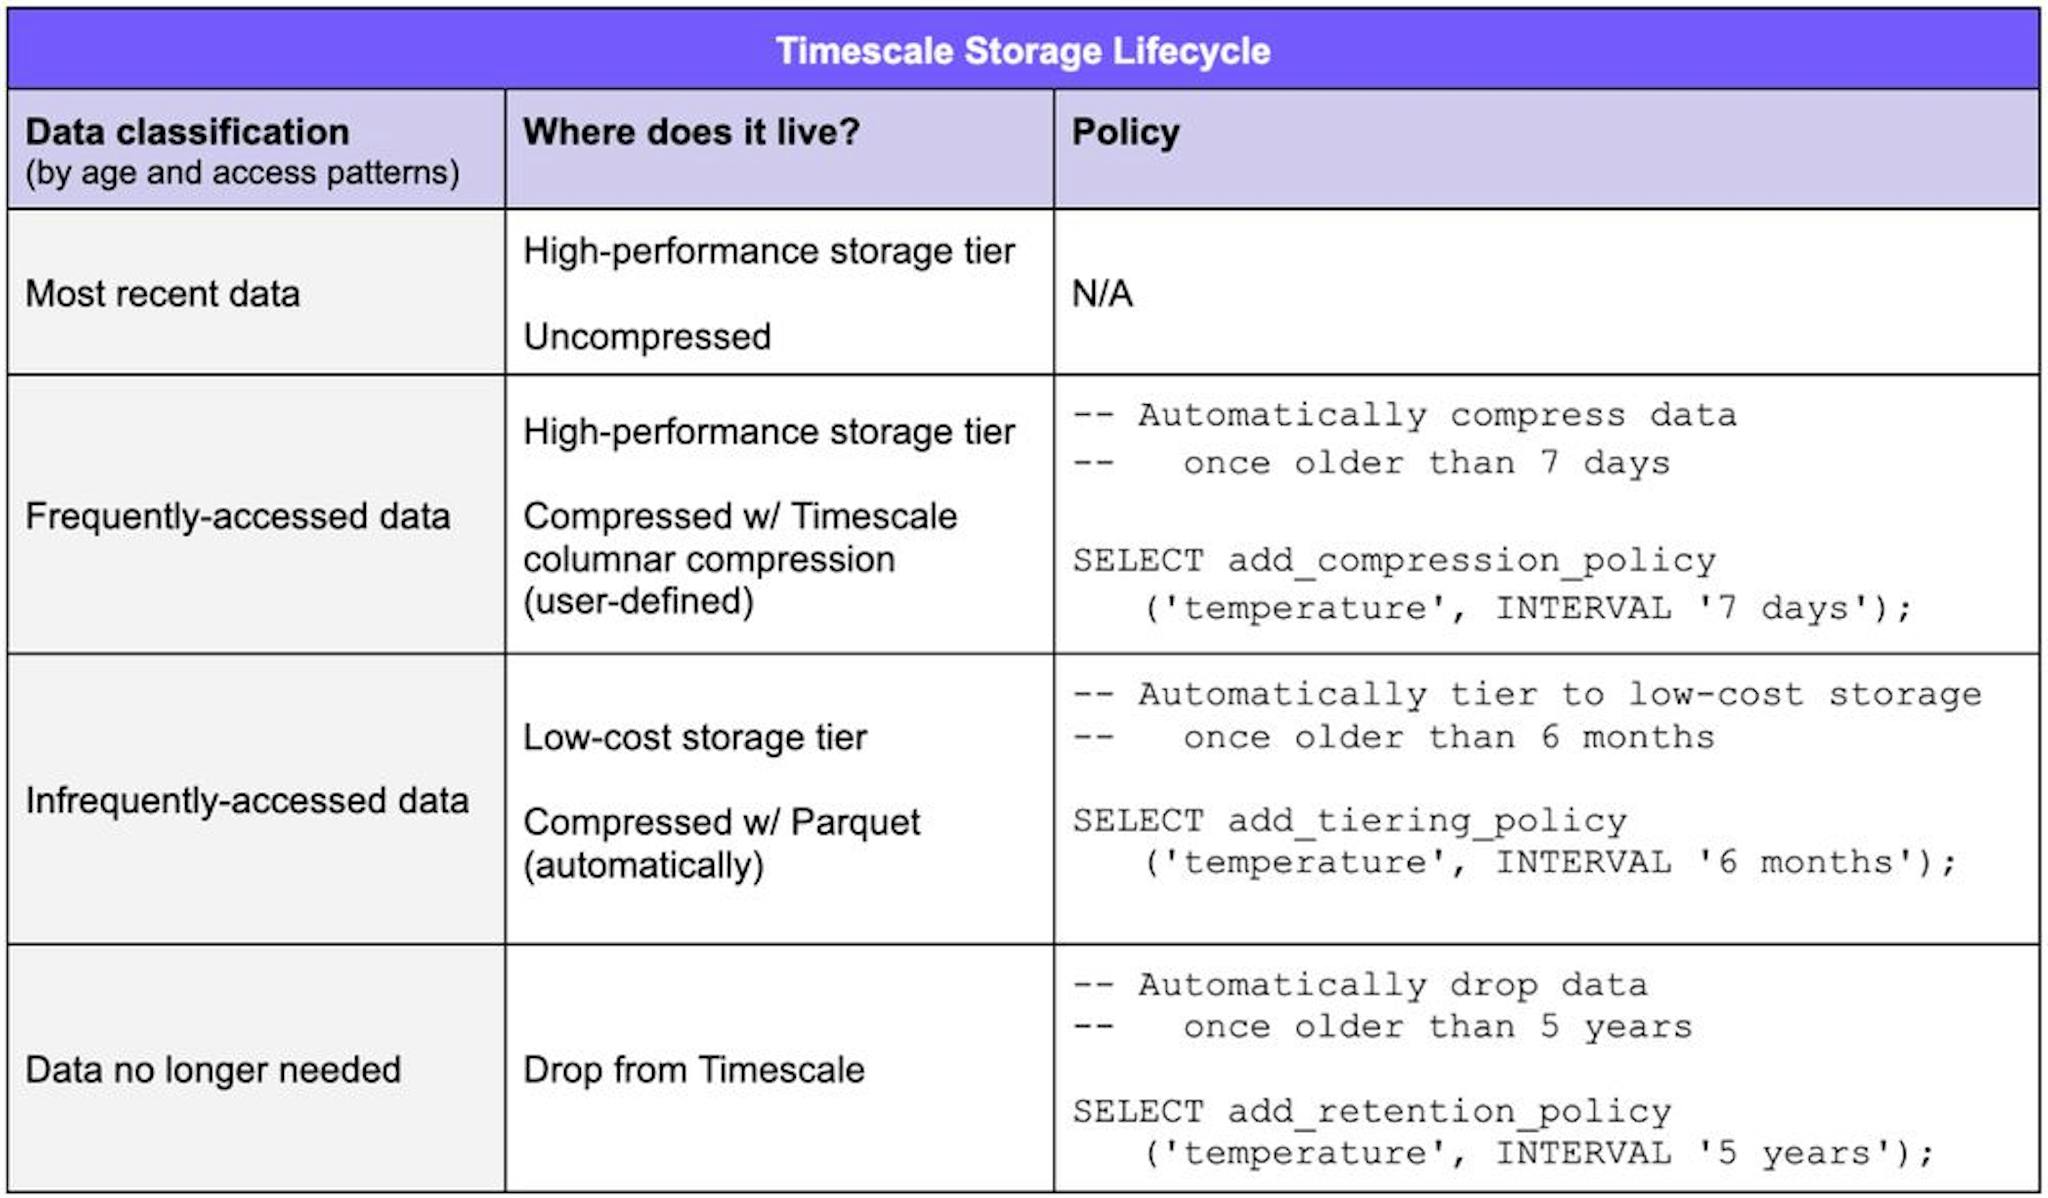 The Timescale storage lifecycle